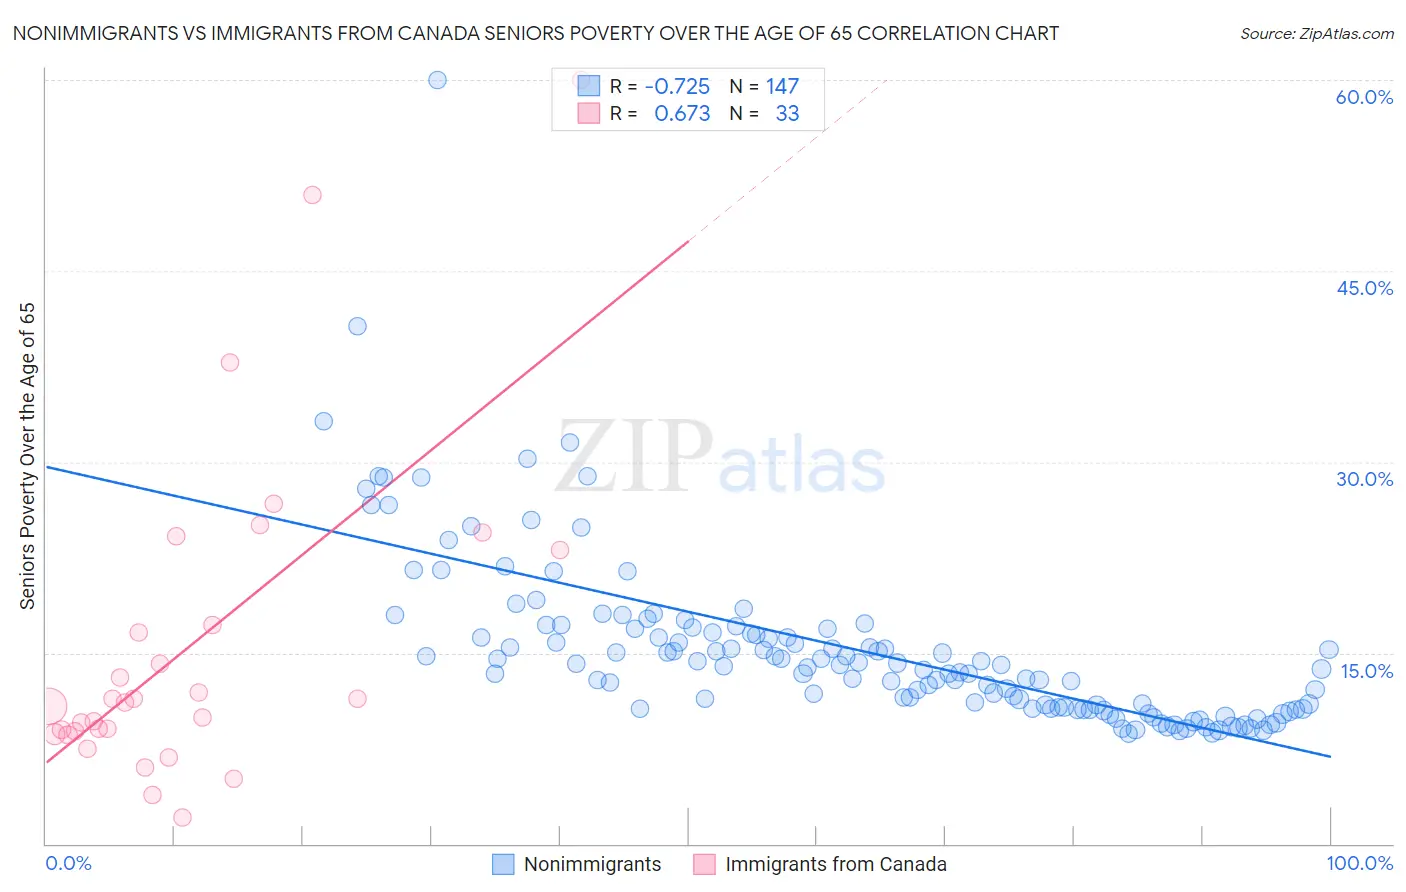 Nonimmigrants vs Immigrants from Canada Seniors Poverty Over the Age of 65